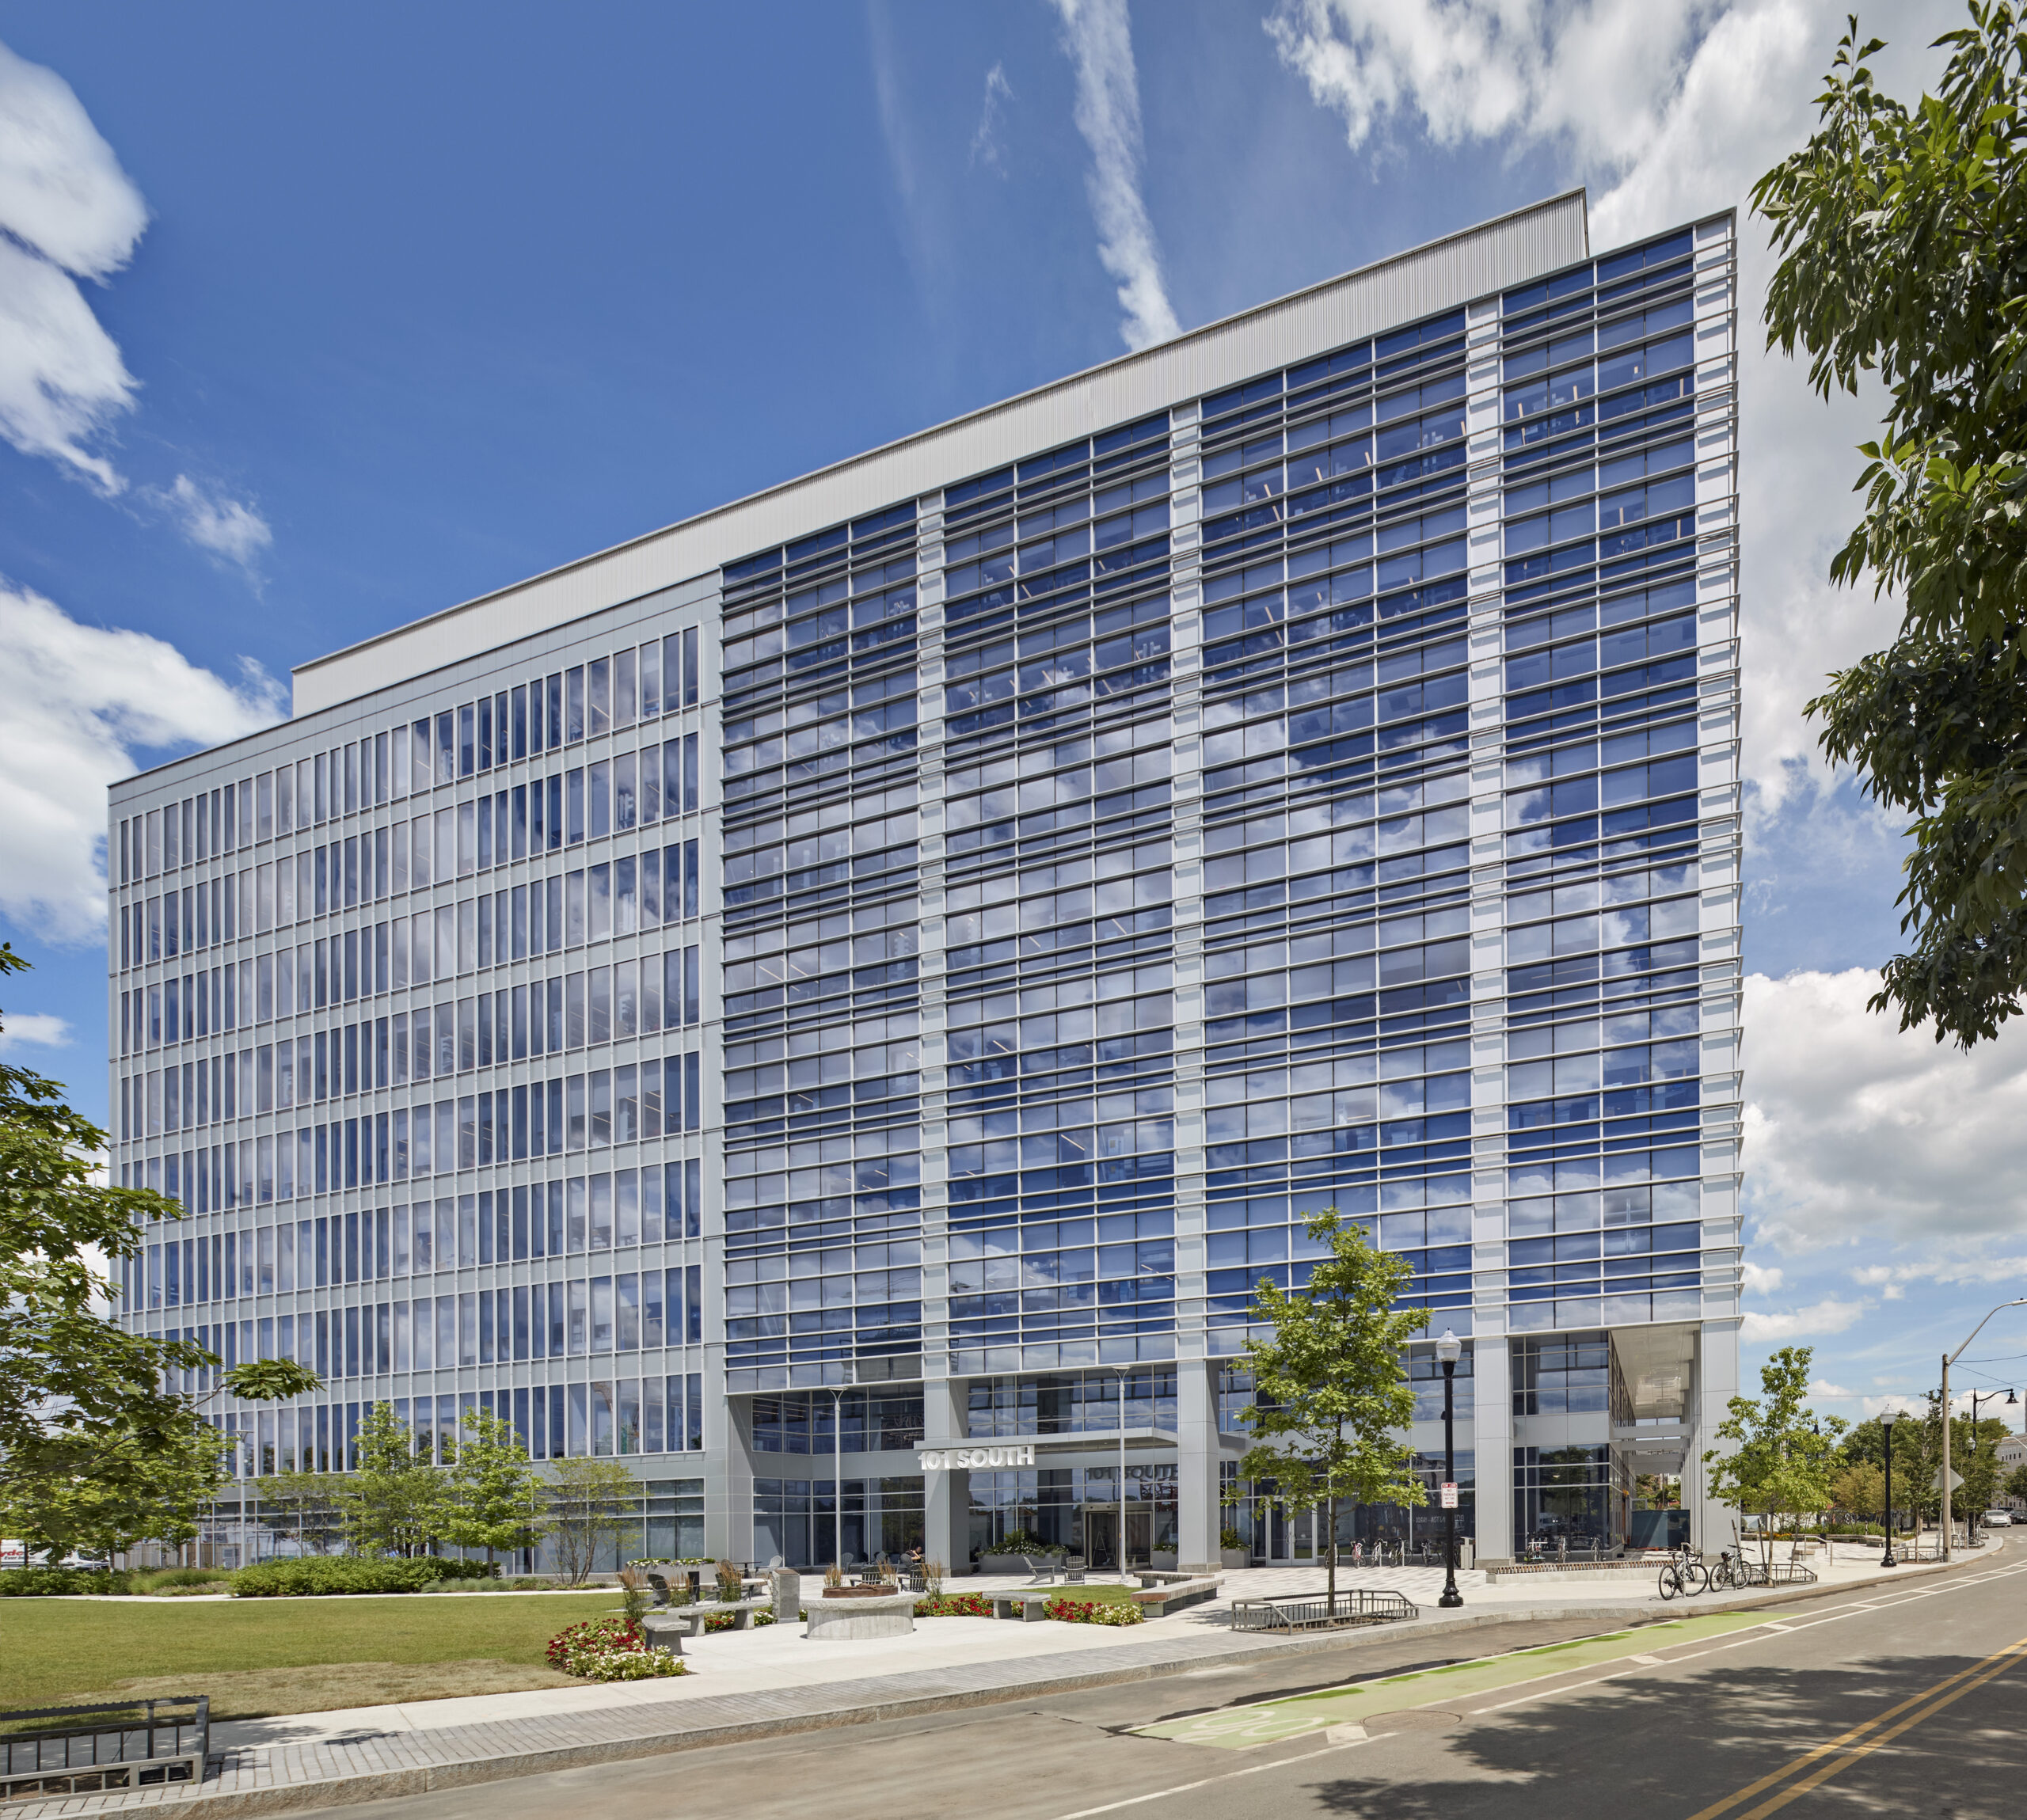 Innovative life sciences lab building with glass and metal façade that has earned LEED Accreditation